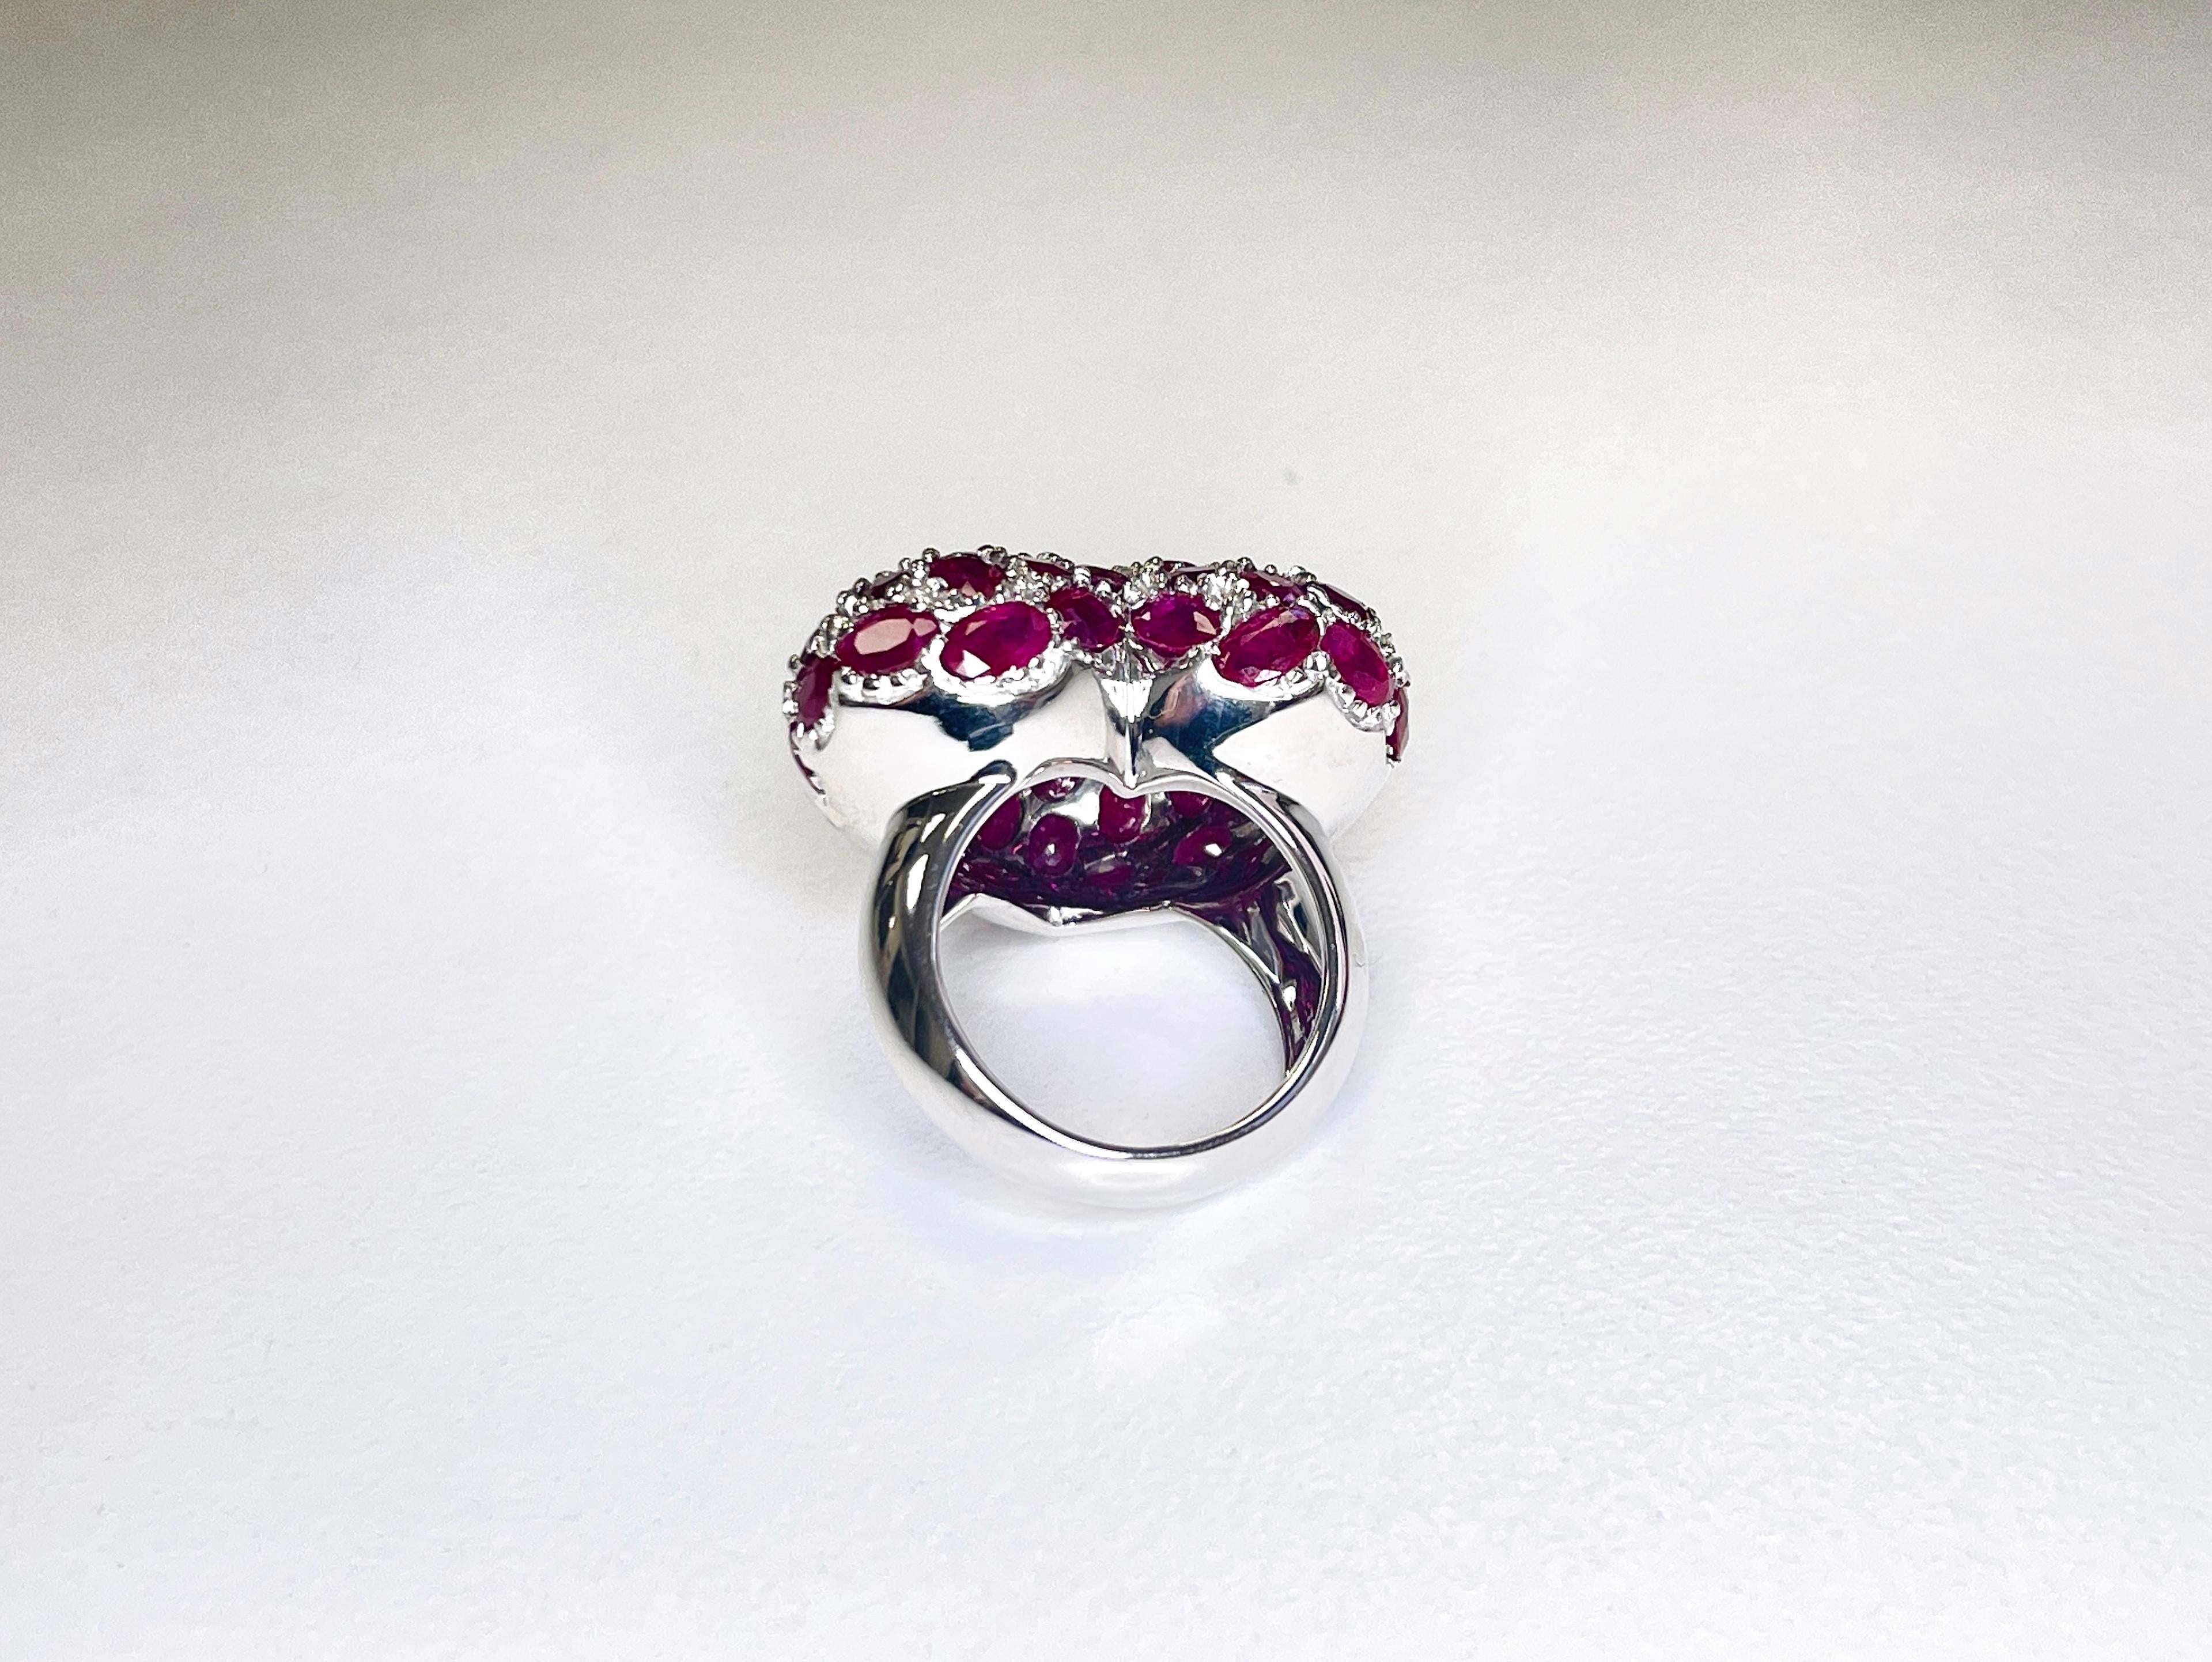 16.50cts White Gold Heart Ruby Oval Shape High Polished Rhodium Ring 18K 7 Inch 3